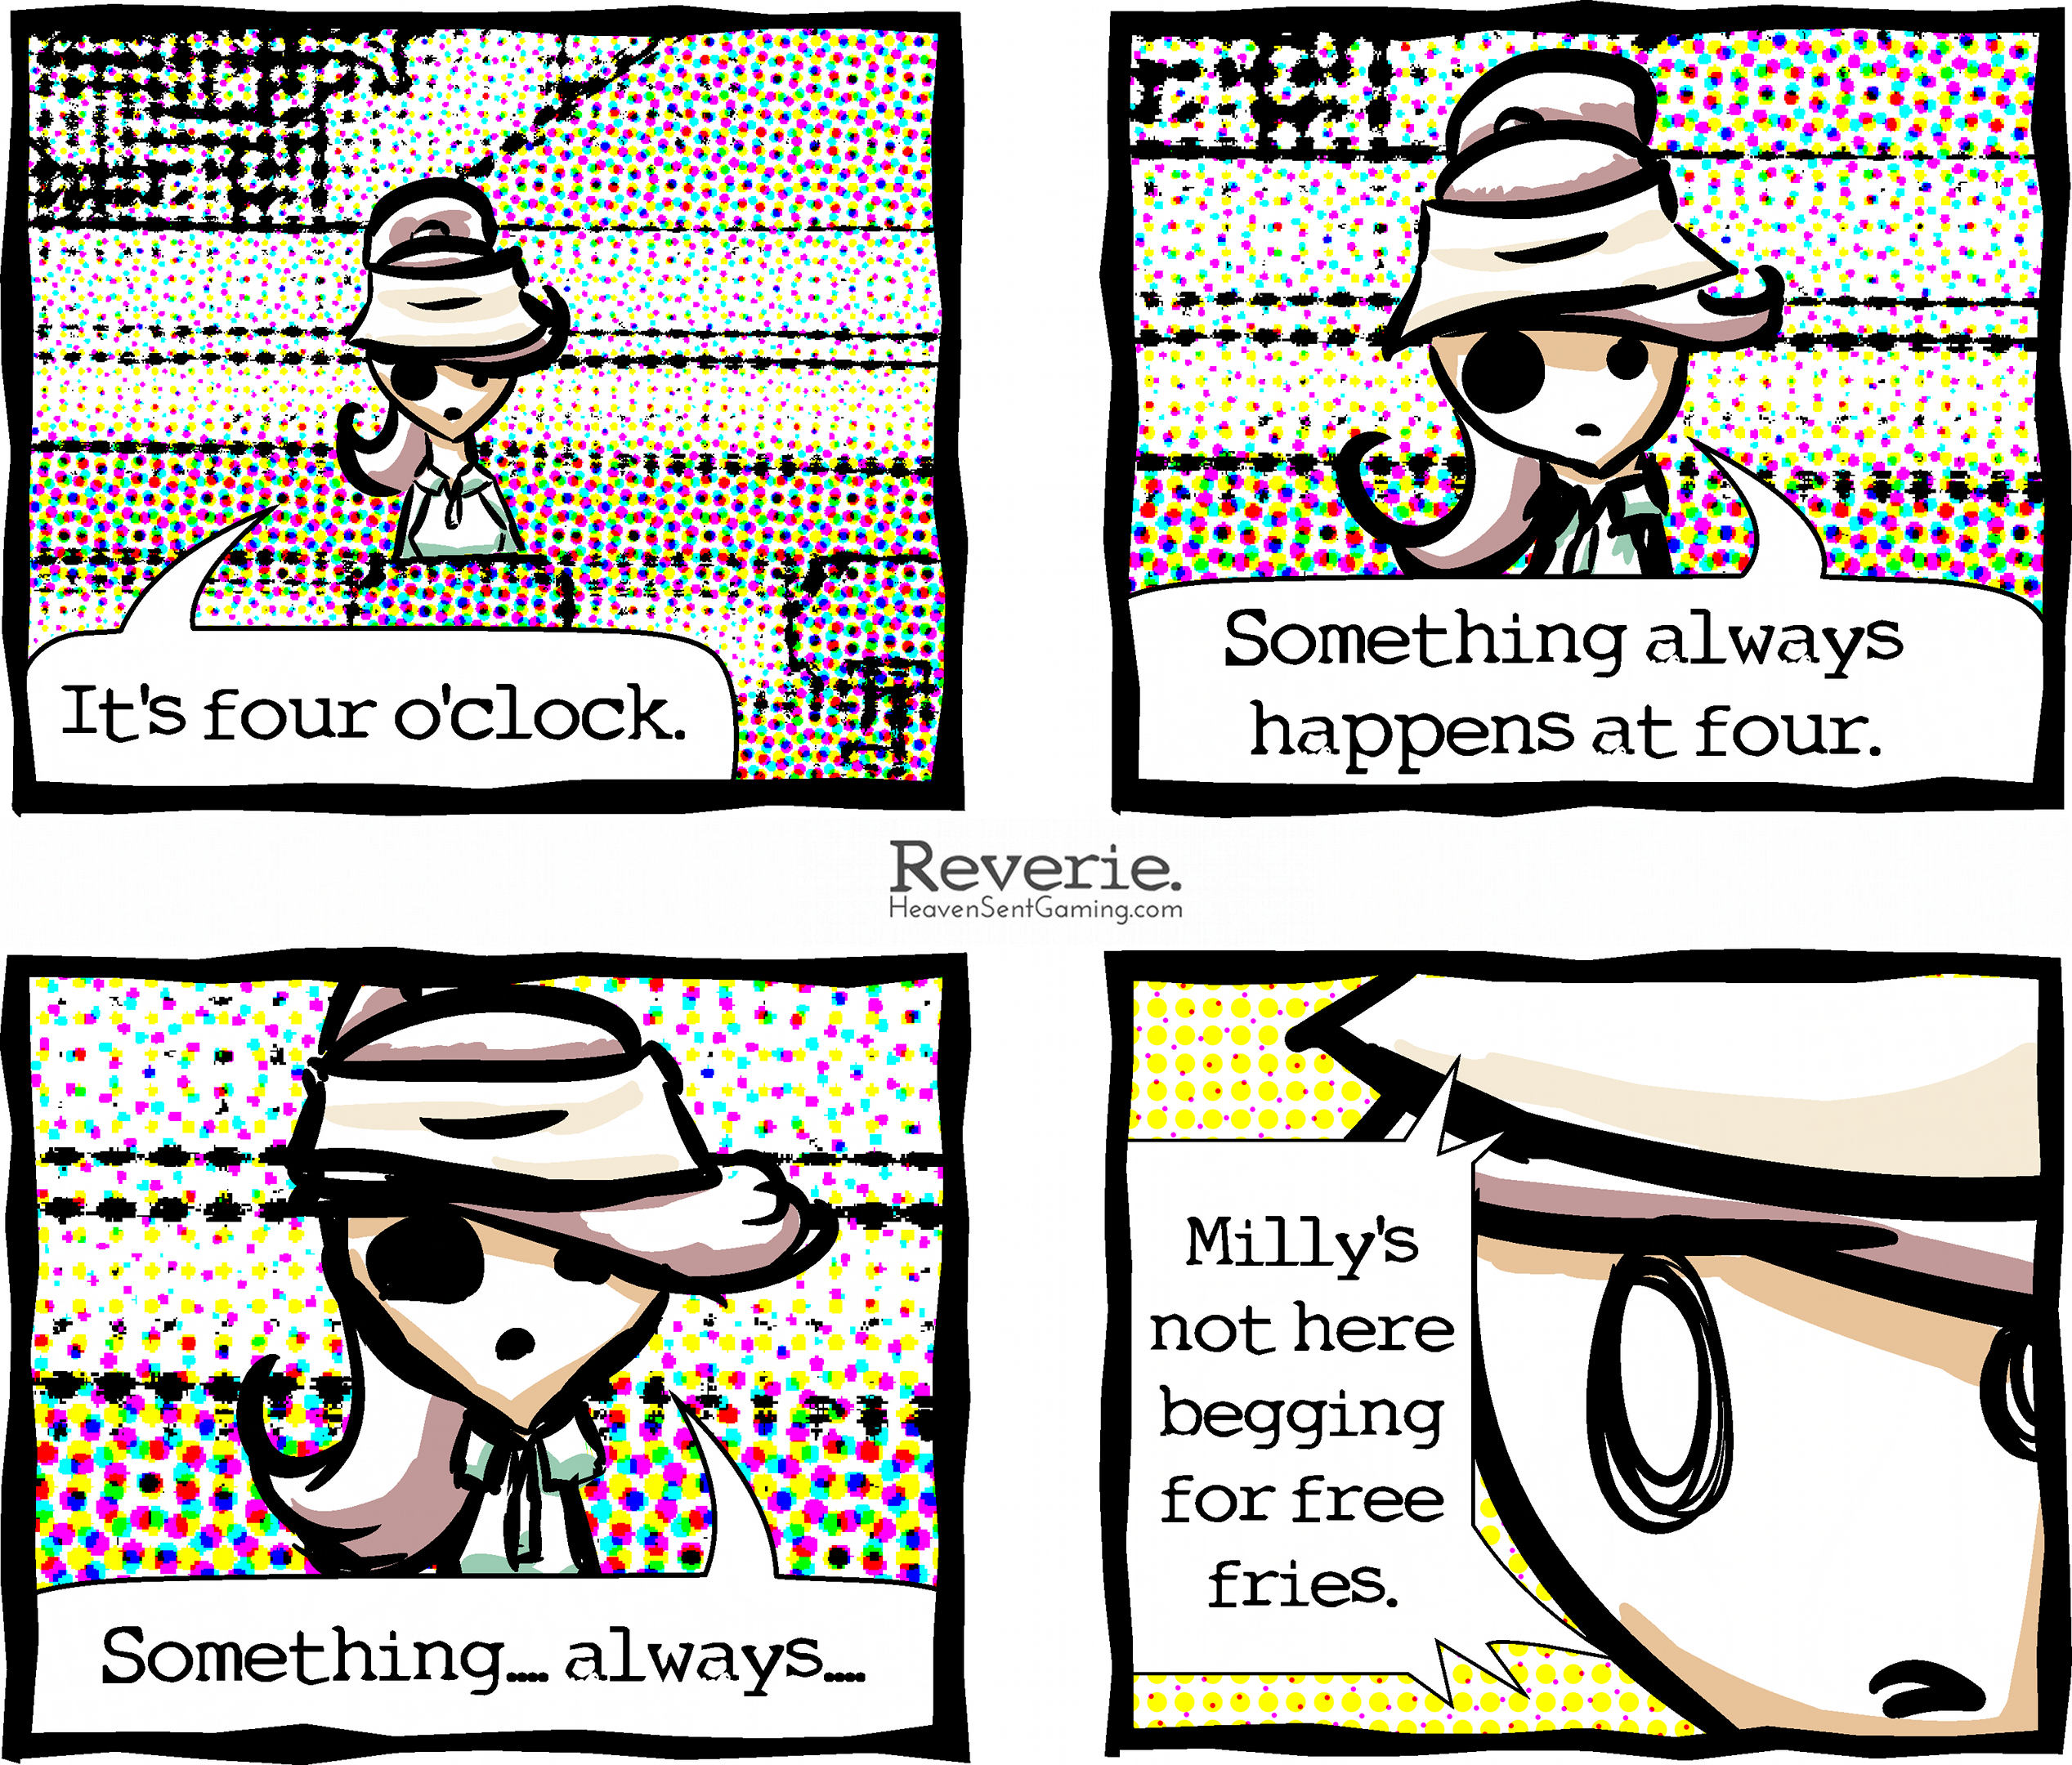 Reverie comic | "Milly Is Missing!" | http://reverie.heavensentgaming.com/archive/milly-is-missing/ ‎